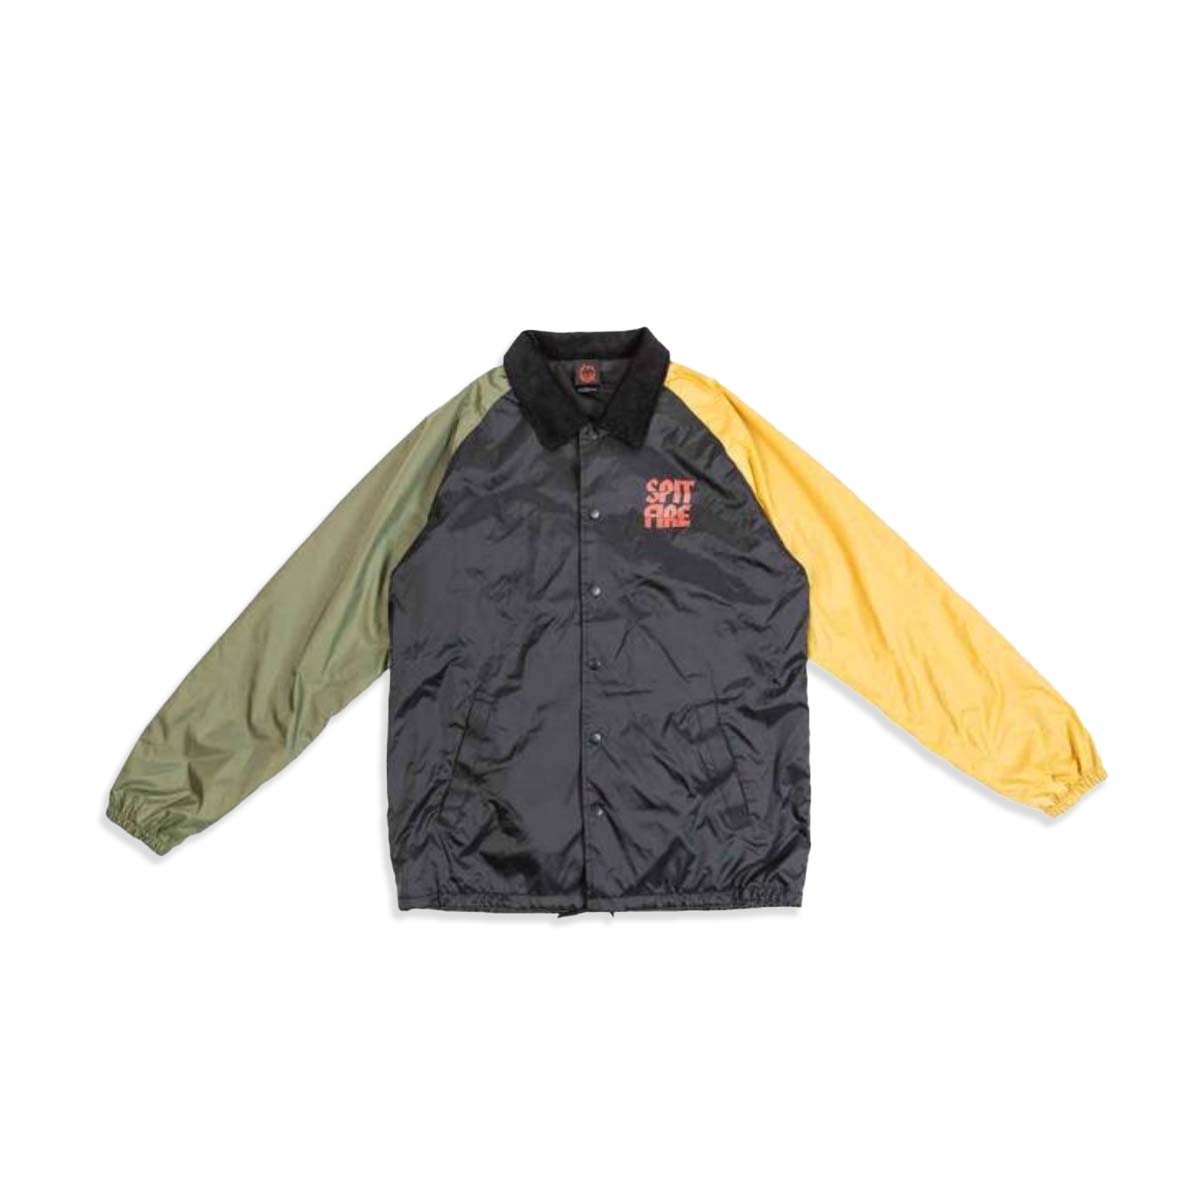 Spitfire Clean Cut Black/Yellow/Red Jacket